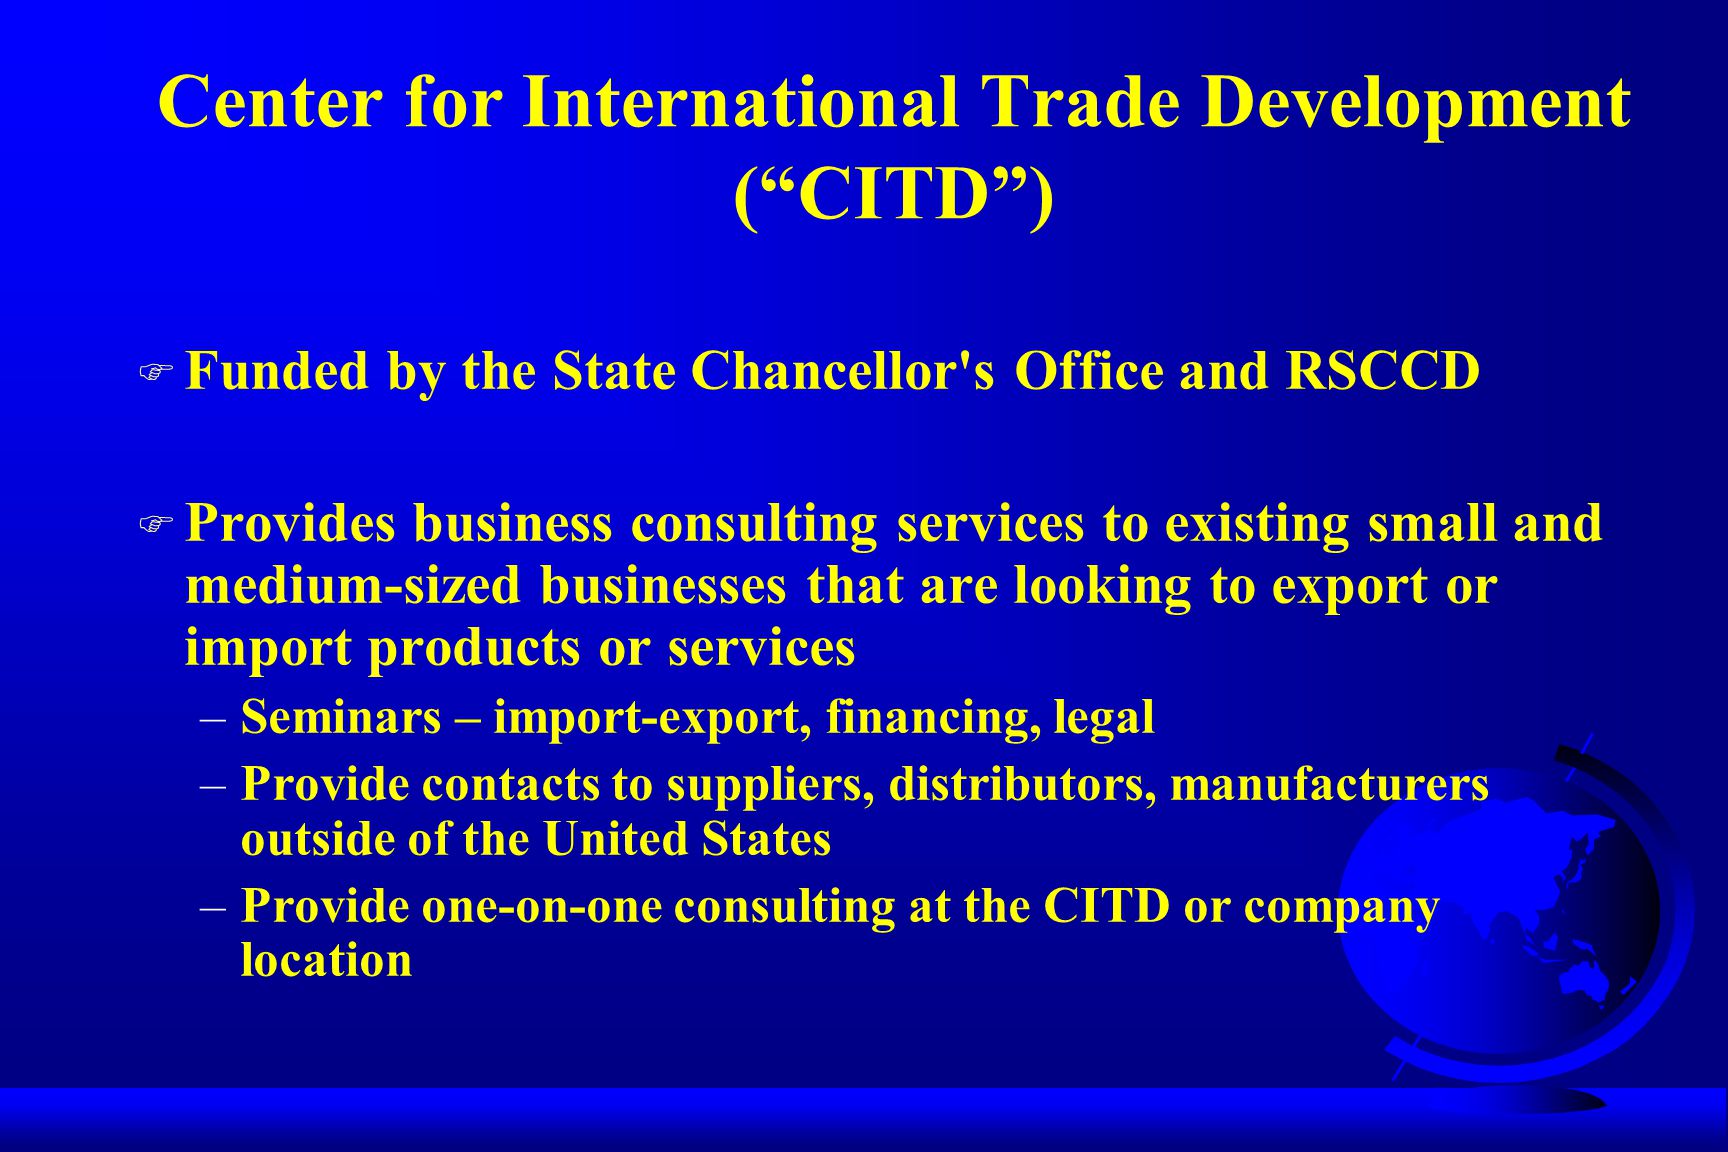 Center for International Trade Development ( CITD ) F Funded by the State Chancellor s Office and RSCCD F Provides business consulting services to existing small and medium-sized businesses that are looking to export or import products or services –Seminars – import-export, financing, legal –Provide contacts to suppliers, distributors, manufacturers outside of the United States –Provide one-on-one consulting at the CITD or company location